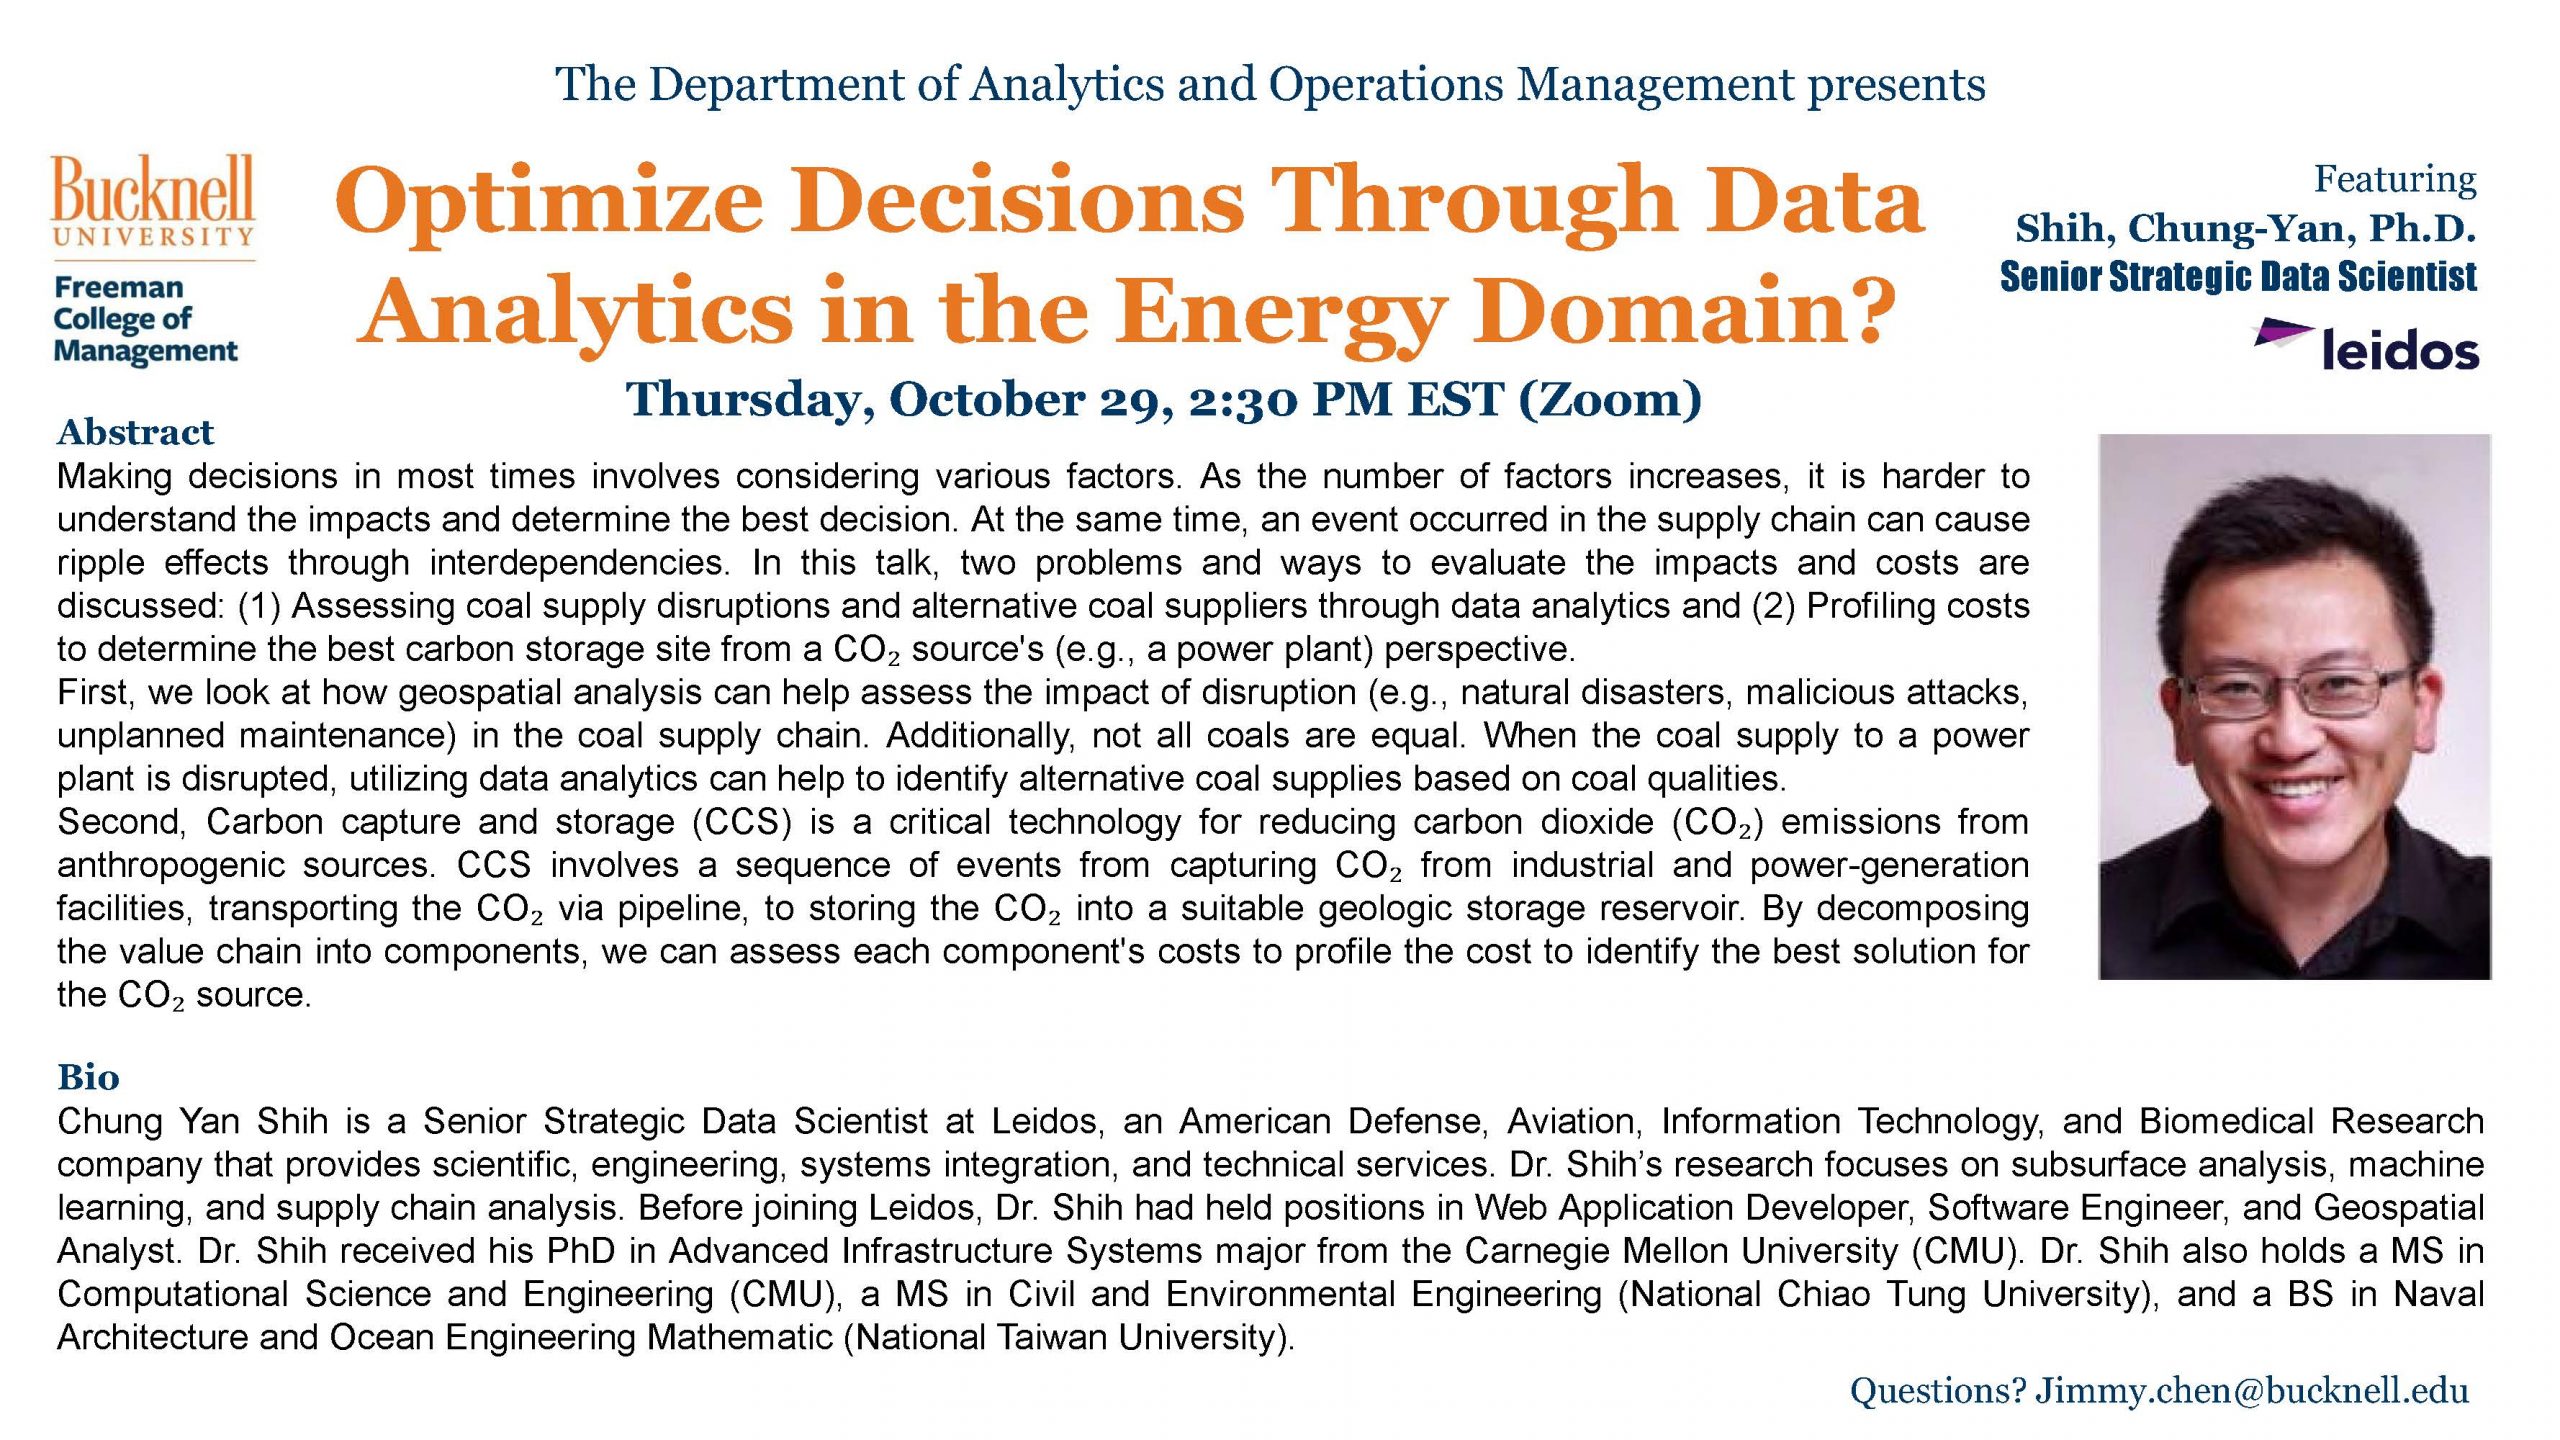 Thursday, October 29, 2:30pm: Optimize Decisions Through Data Analytics in the Energy Domain